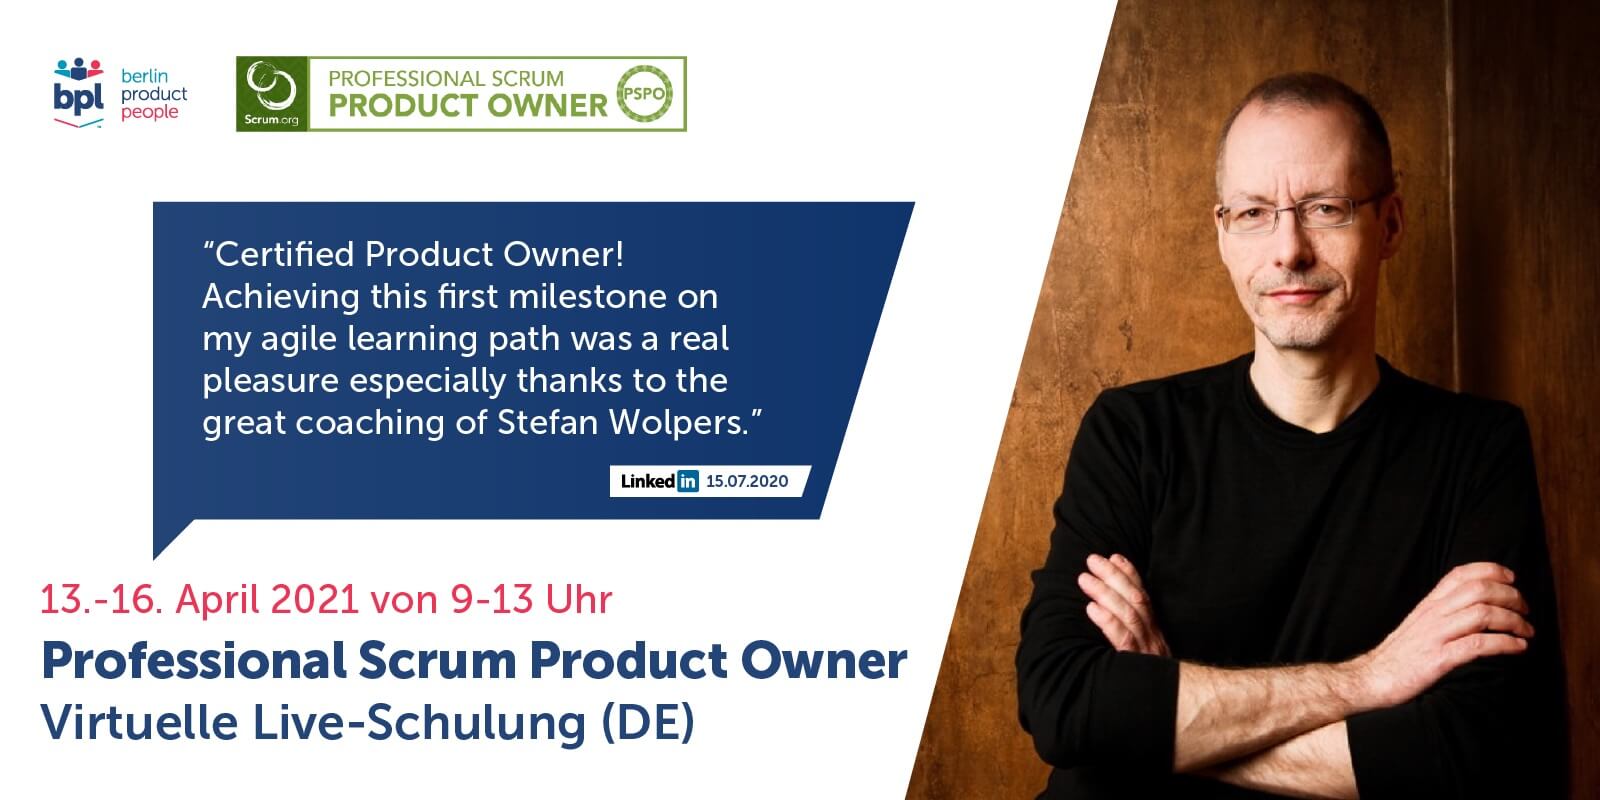 Virtuelles Professional Scrum Product Owner Training mit PSPO Zertifikat — 13. bis 16. April 2021 — Berlin Product People GmbH